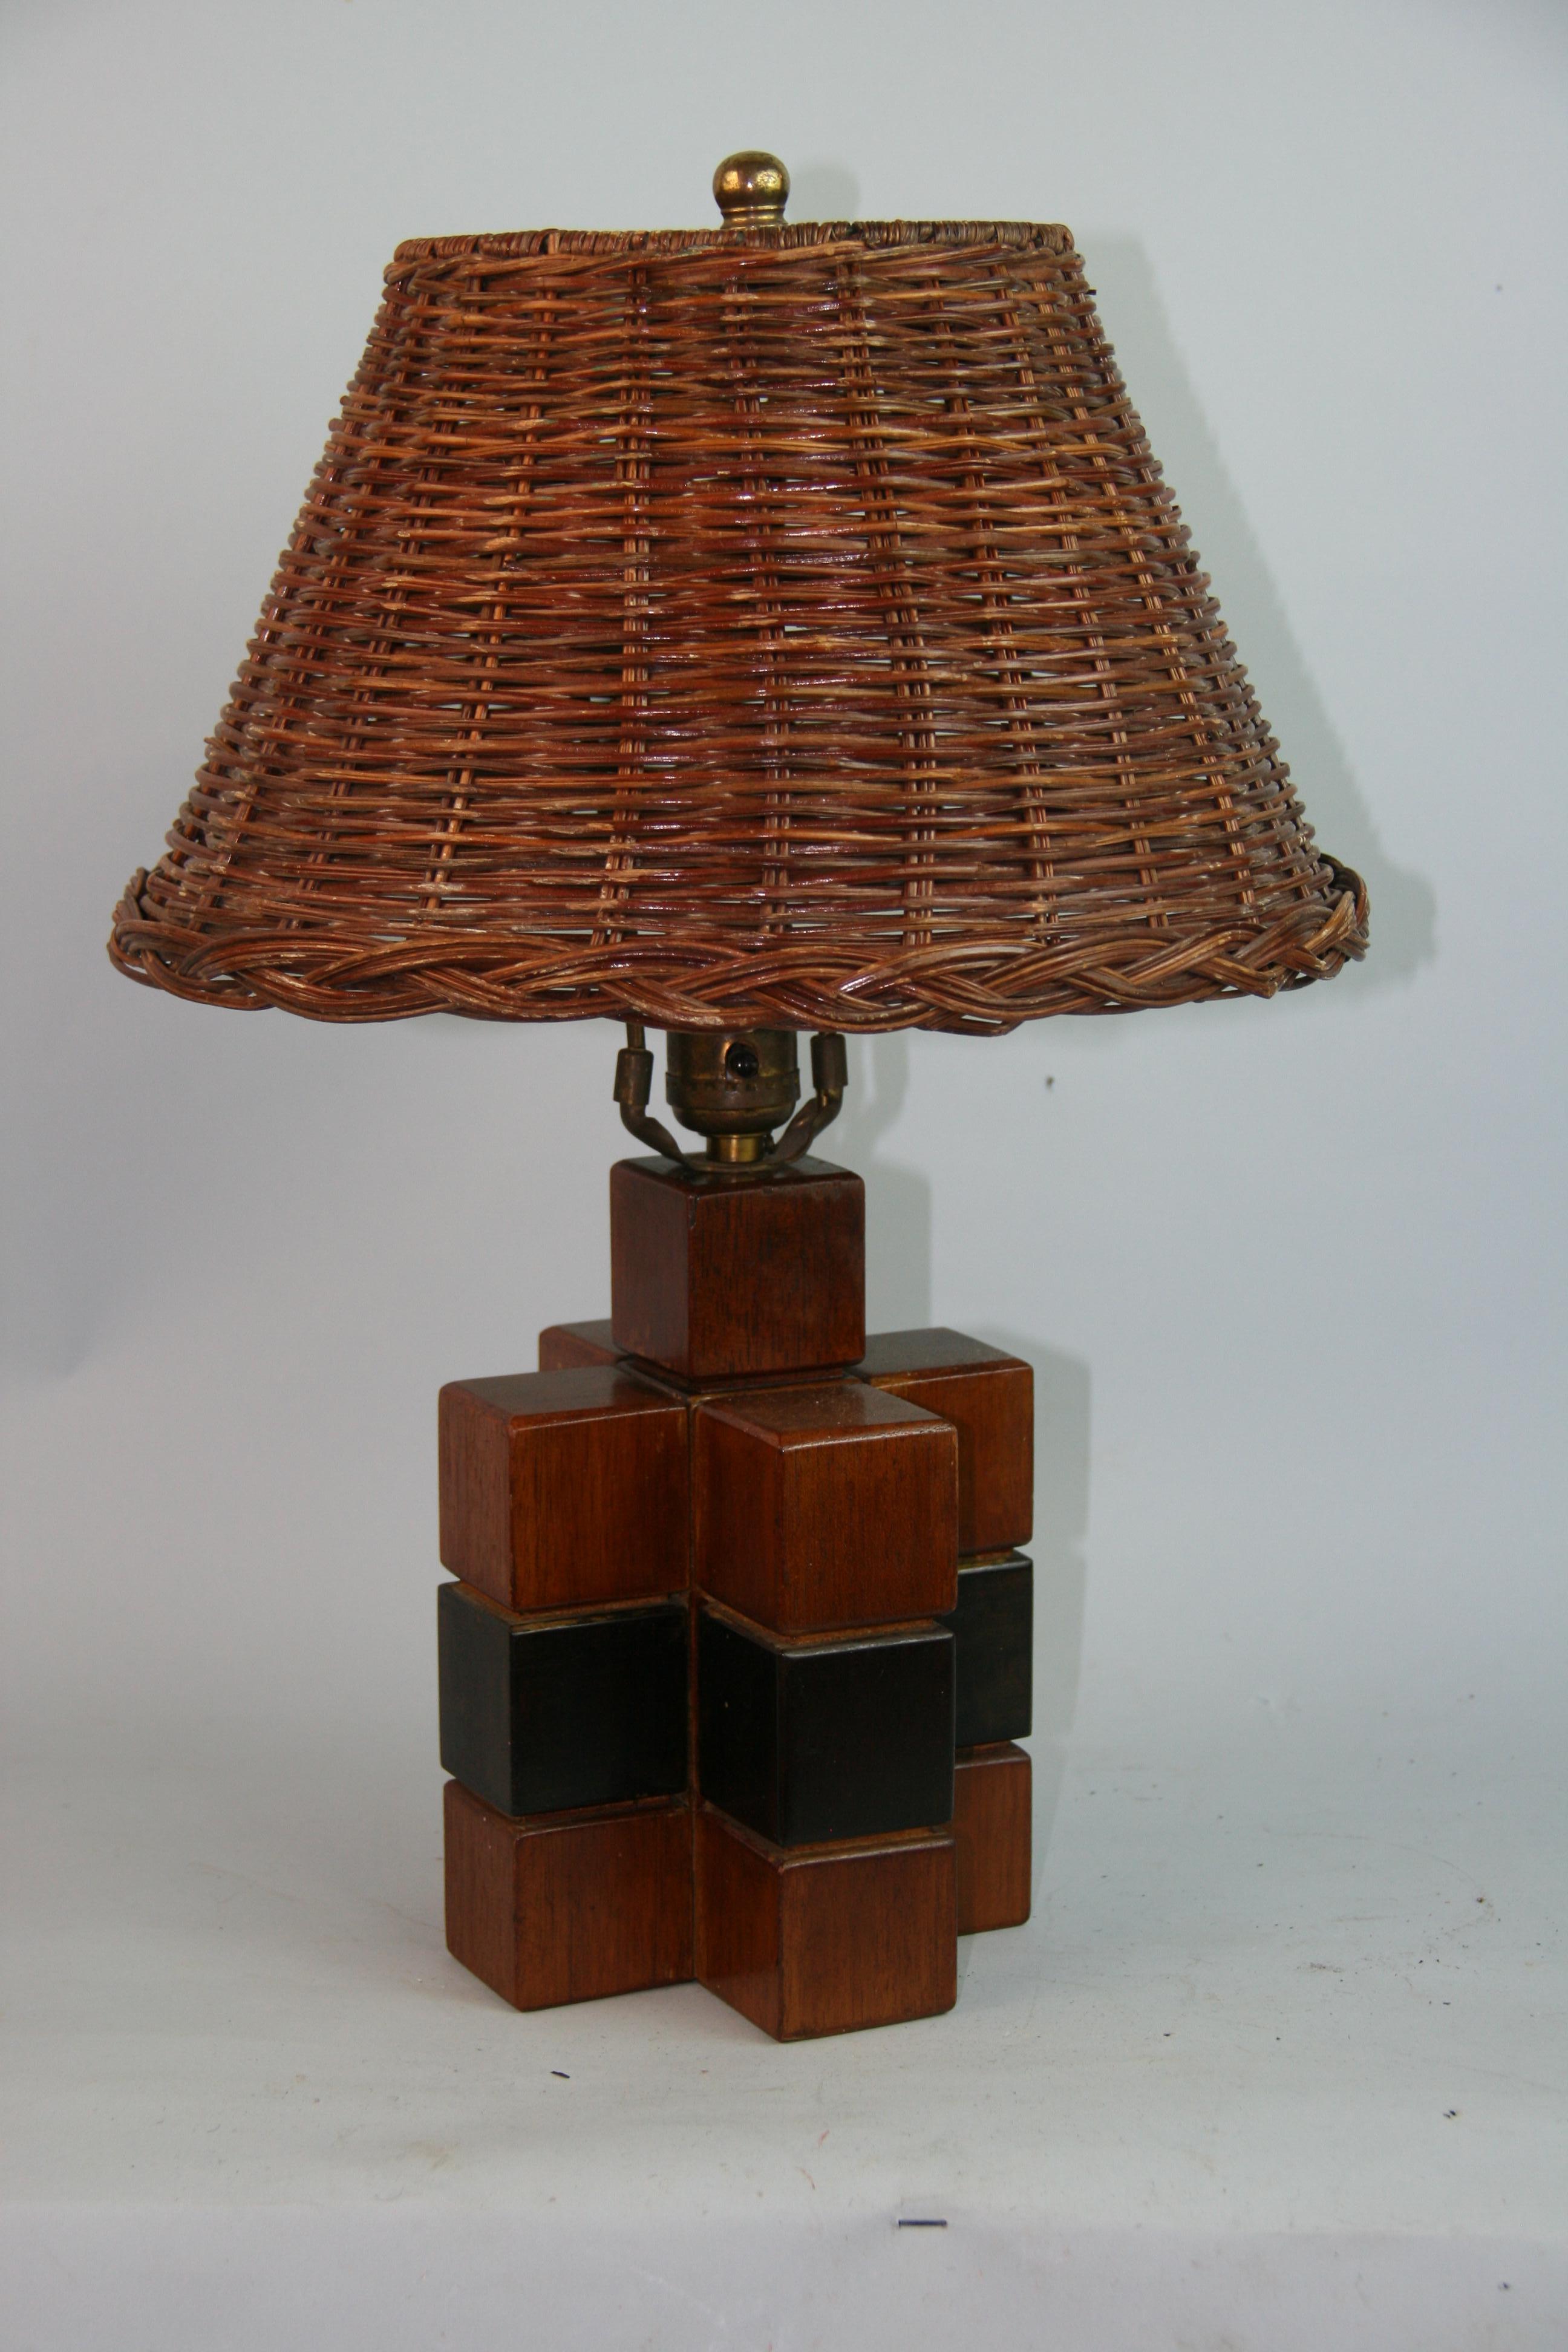 1375 Pair hand crafted Scandinavian two tone wood lamps with wicker shades
Measures: 17' tall to top of shade
shade 12